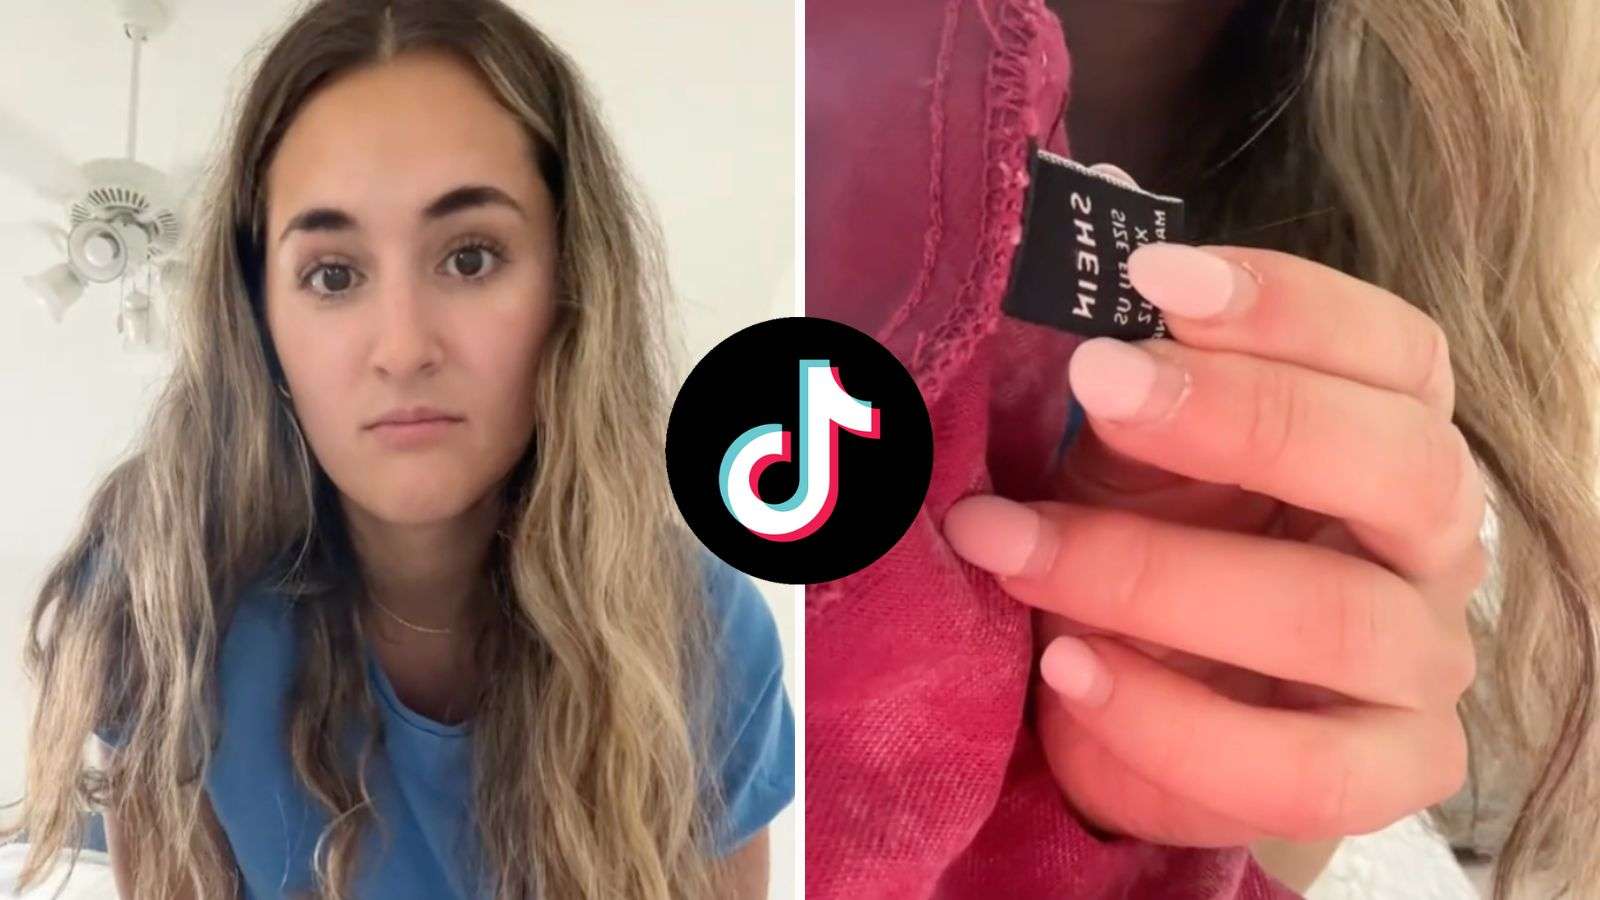 Woman baffled after finding SHEIN tag on $83 Jaded London top